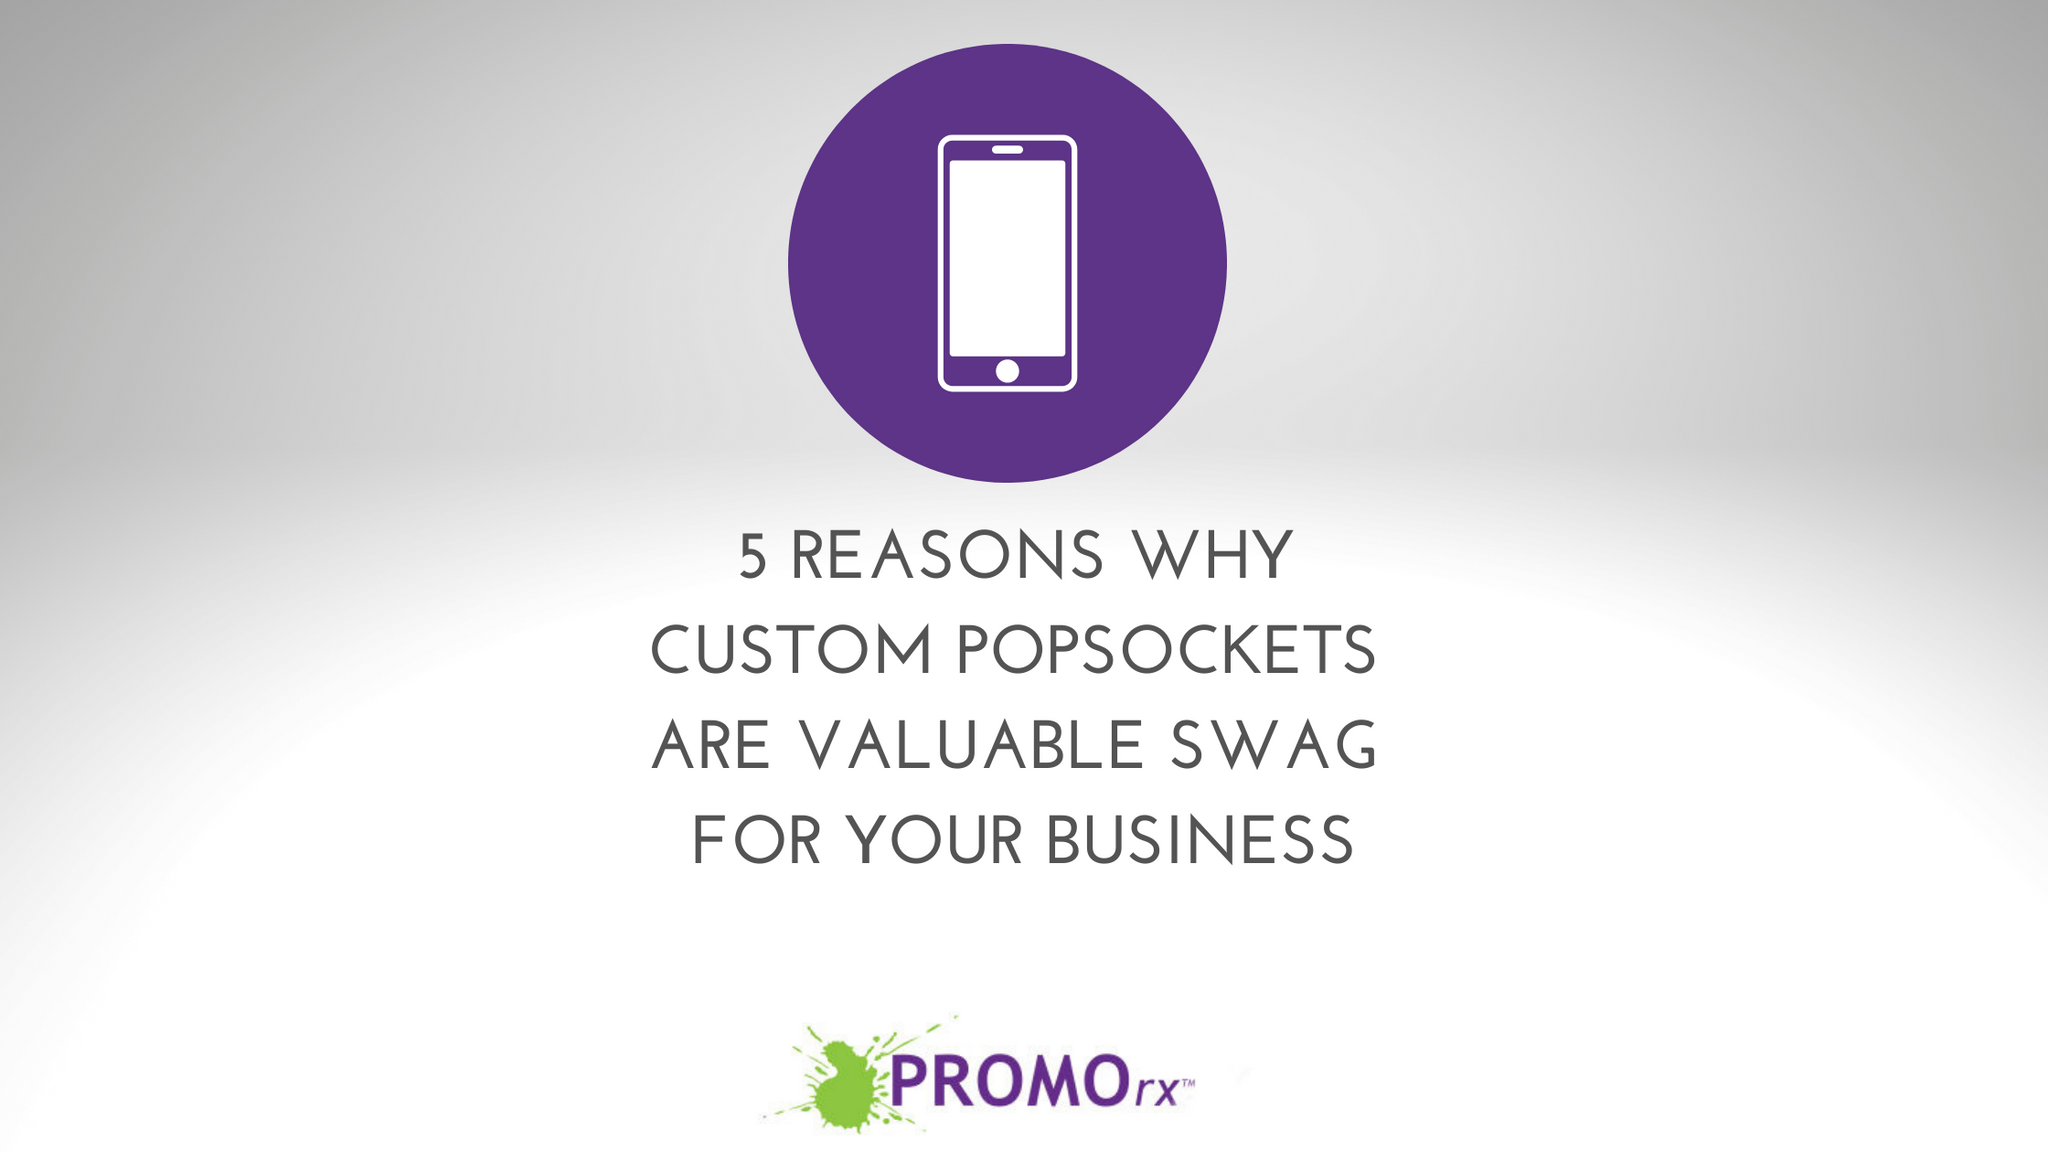 5 Reasons Why Custom PopSockets Are Valuable Swag for Your Business